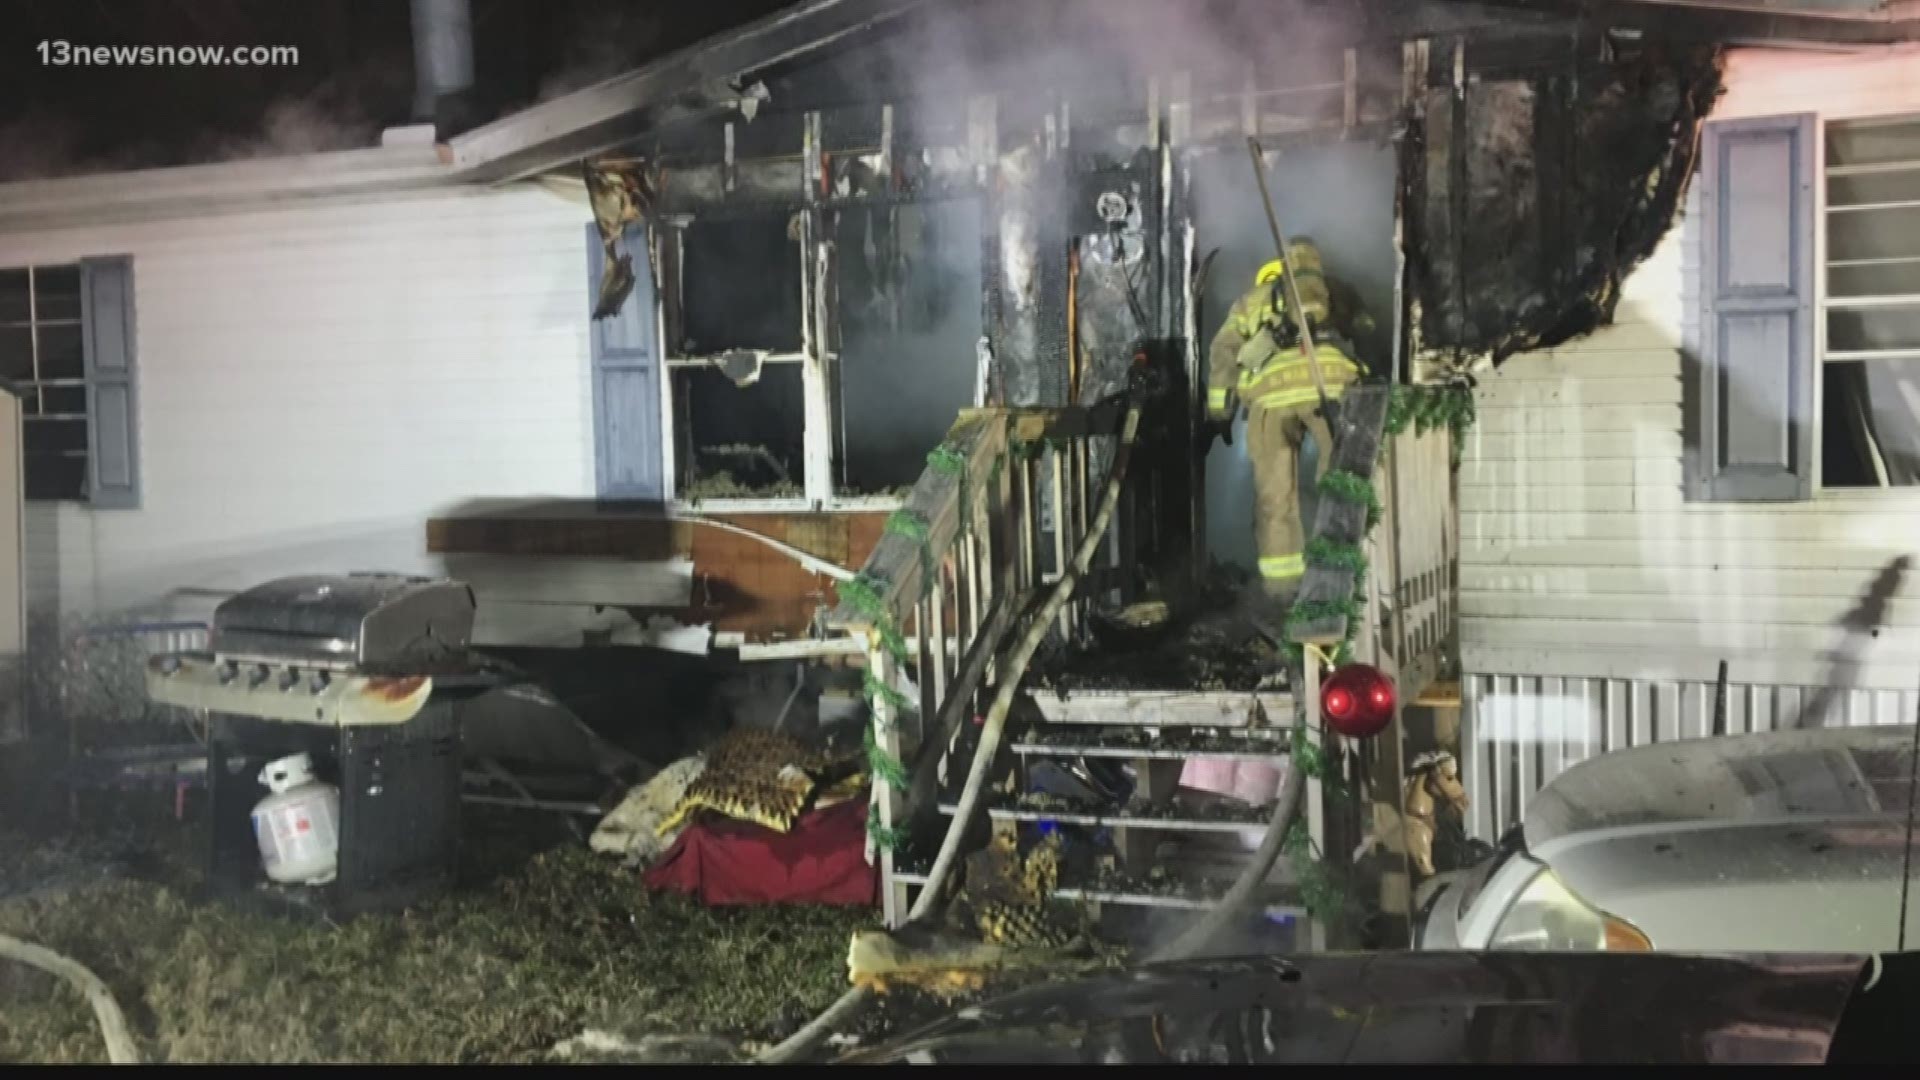 A person was hurt in a York County fire because they tried to help rescue others.